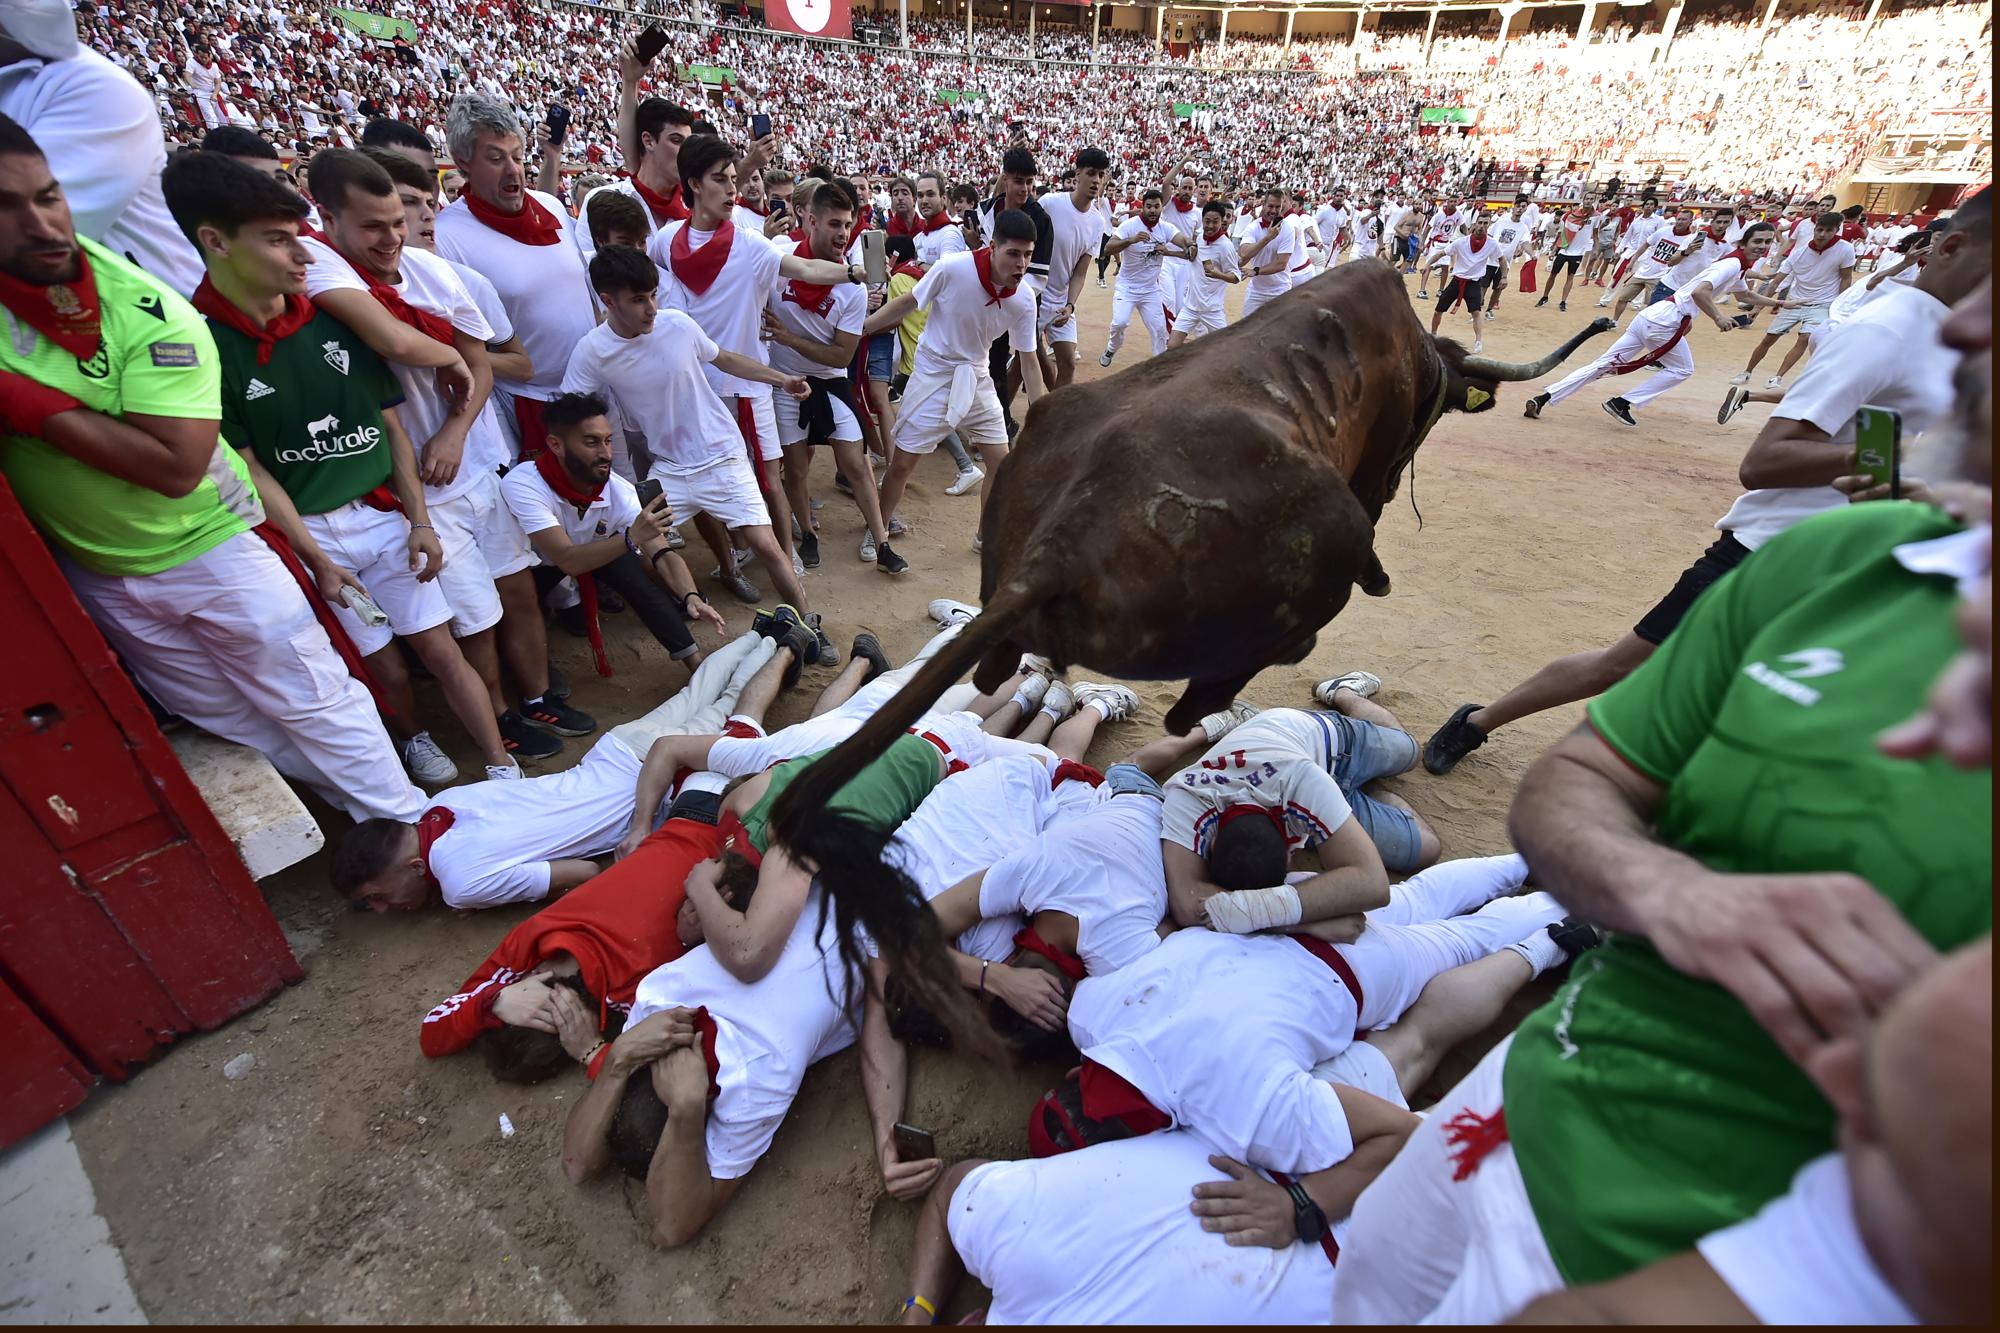 Spain's running of the bulls: 1 person gored in Pamplona | AP News